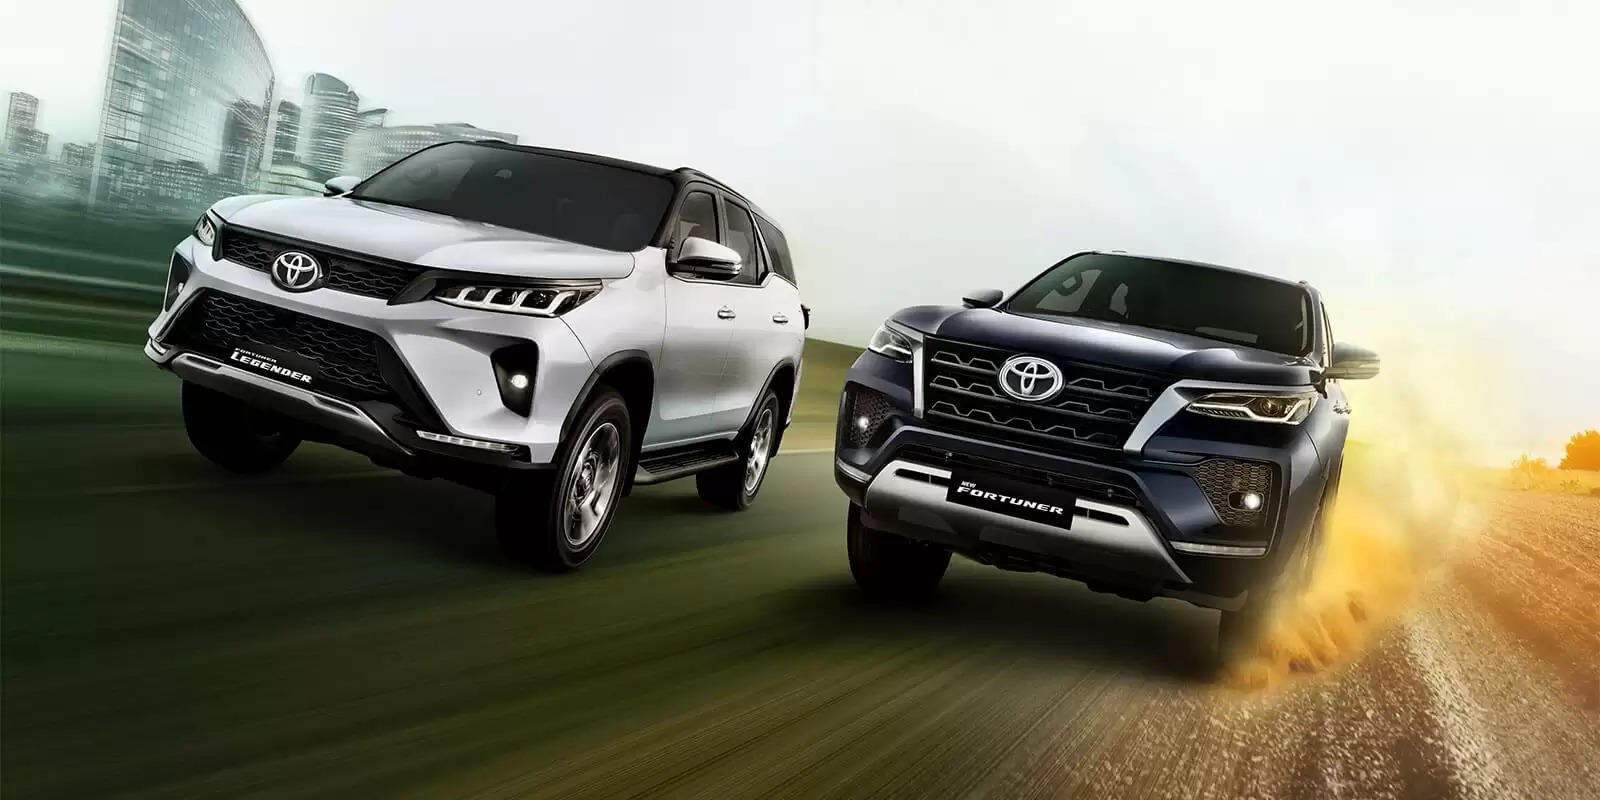 Bumper hike in prices of Toyota's SUV cars